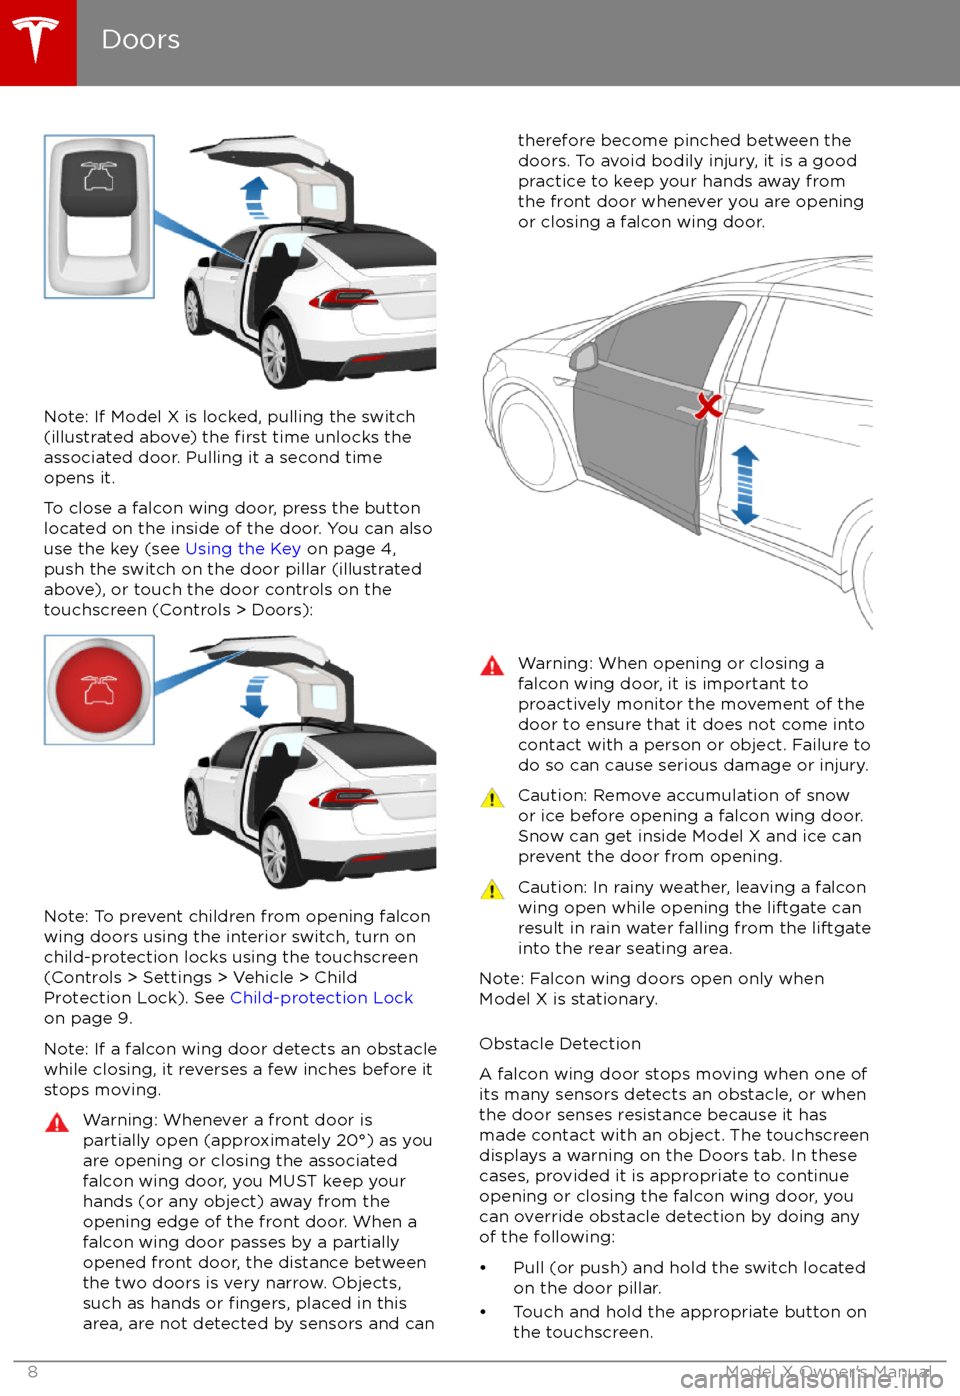 TESLA MODEL X 2017  Owners Manual  Note: If Model X is locked, pulling the switch(illustrated above) the first time unlocks the
associated door. Pulling it a second time
opens it.
To close a falcon wing door, press the button located o